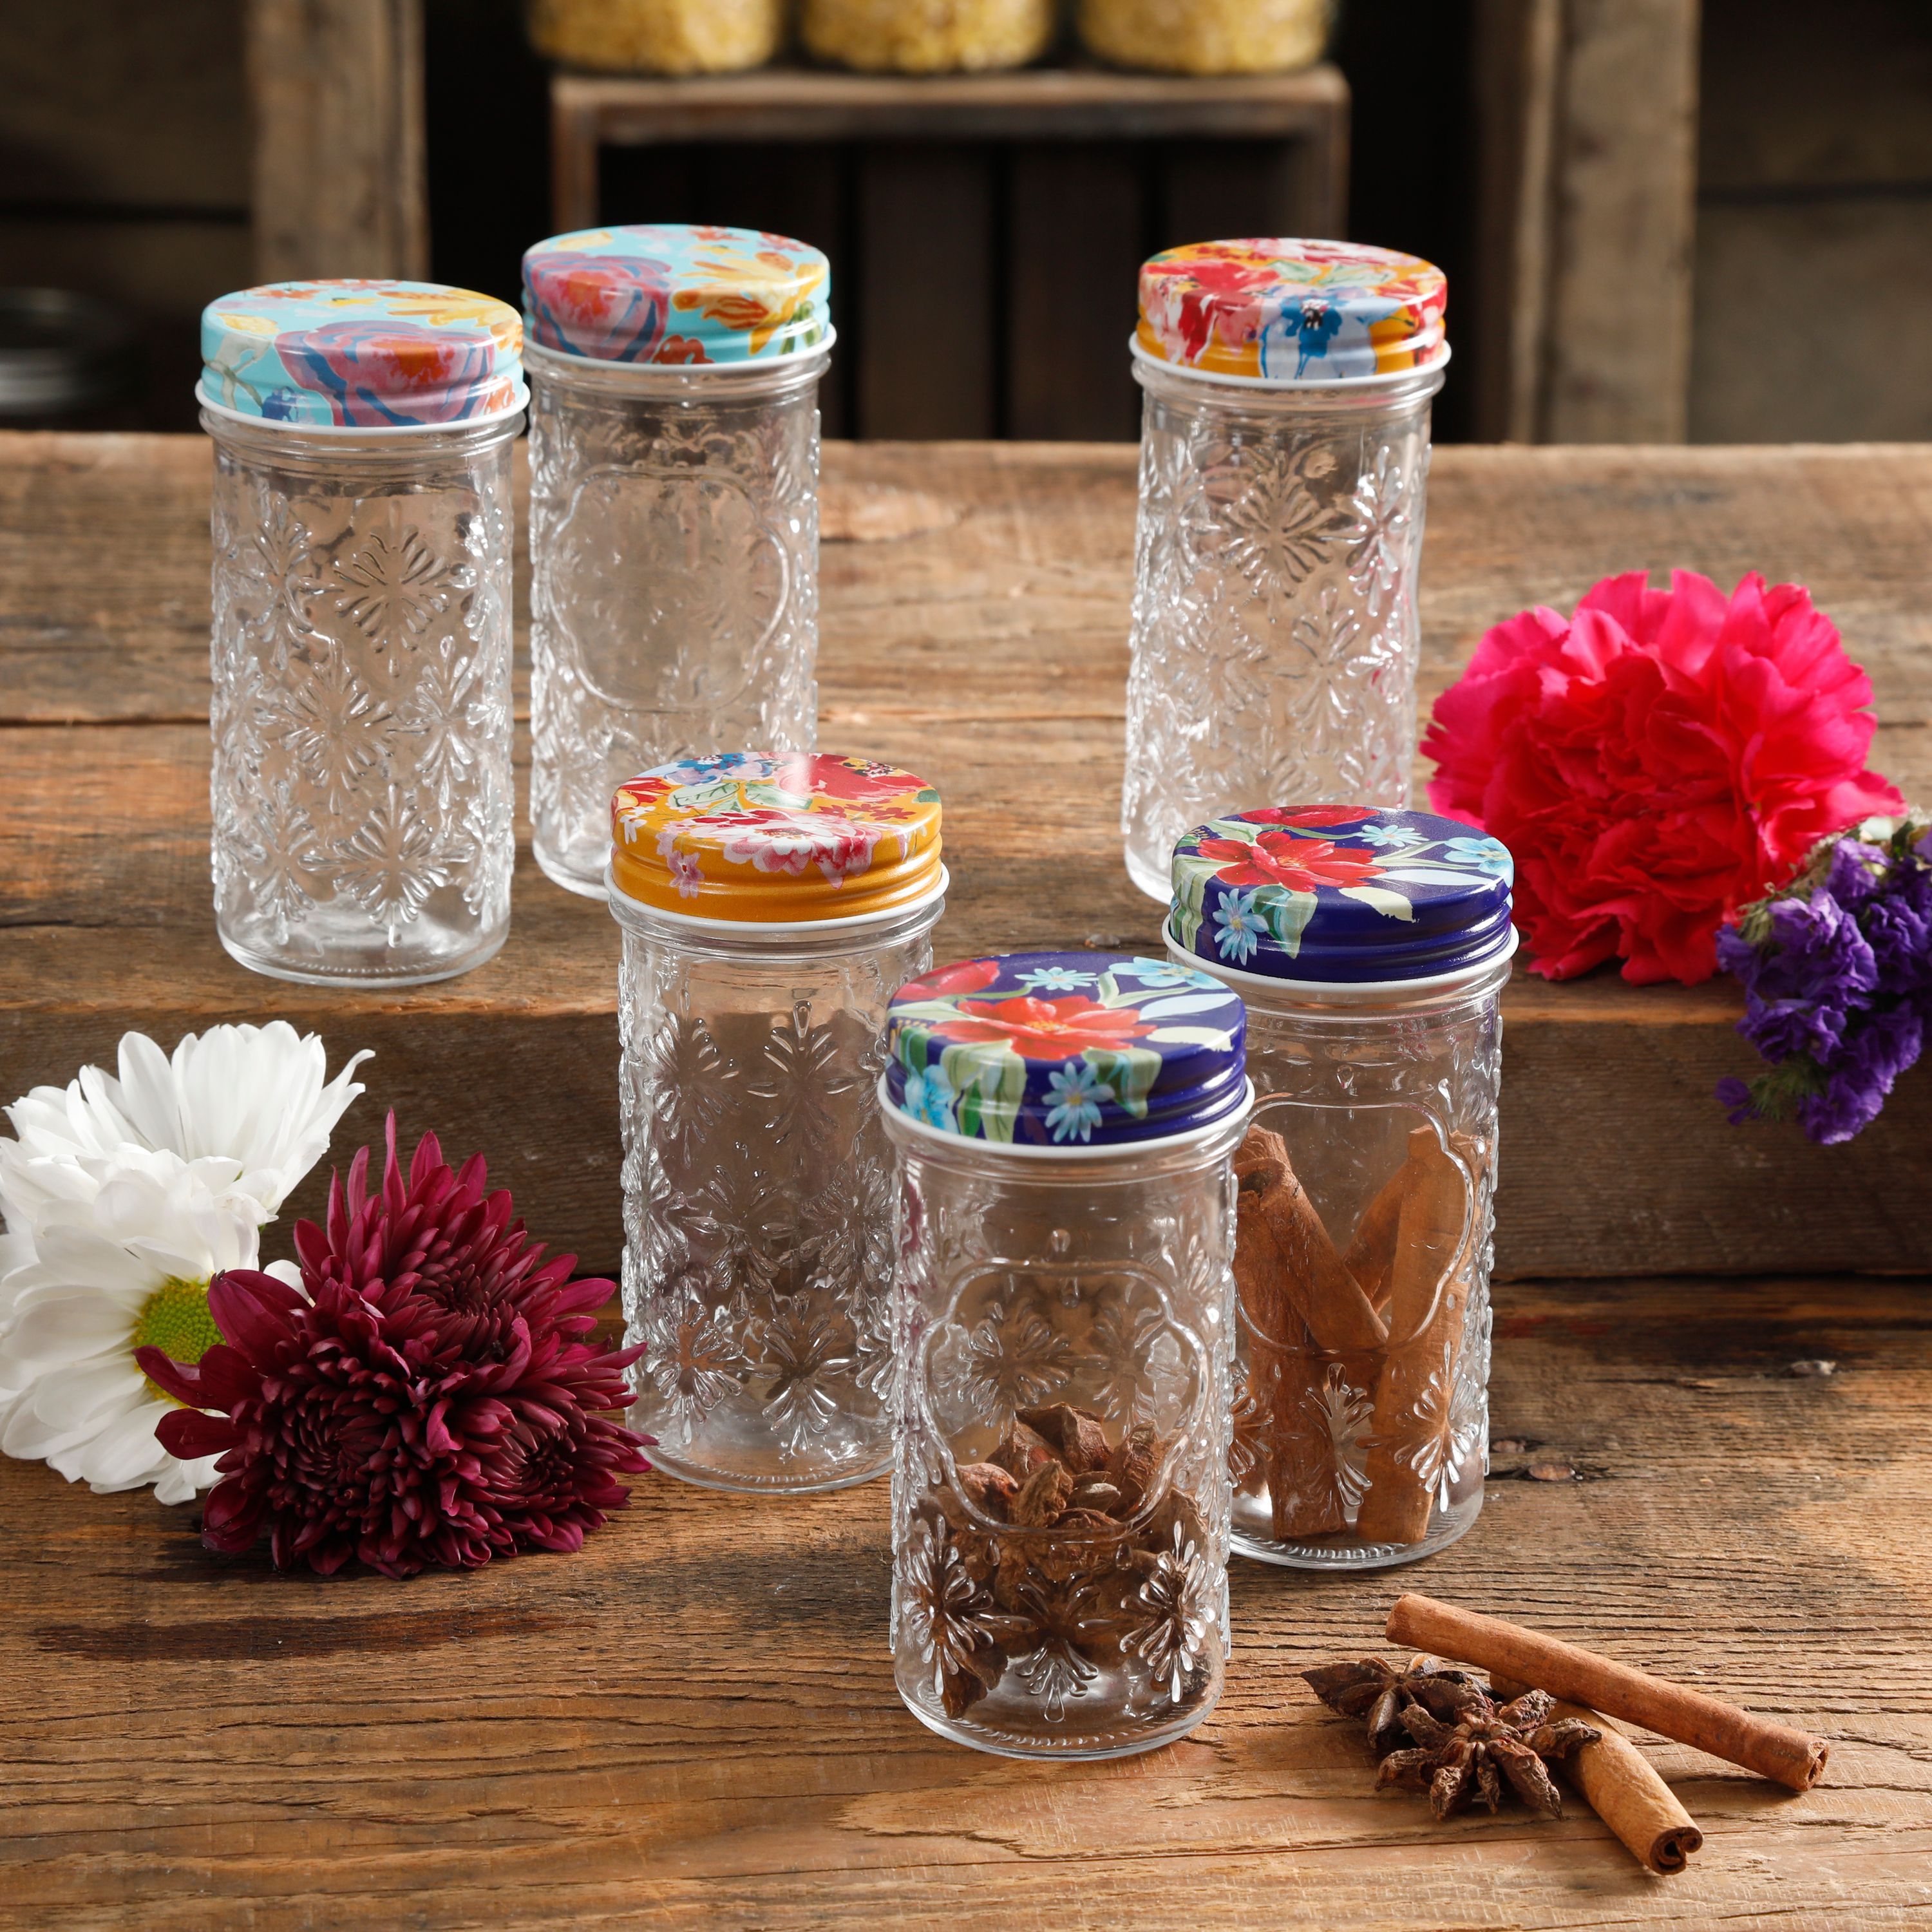 The Pioneer Woman Floral Spice Jars